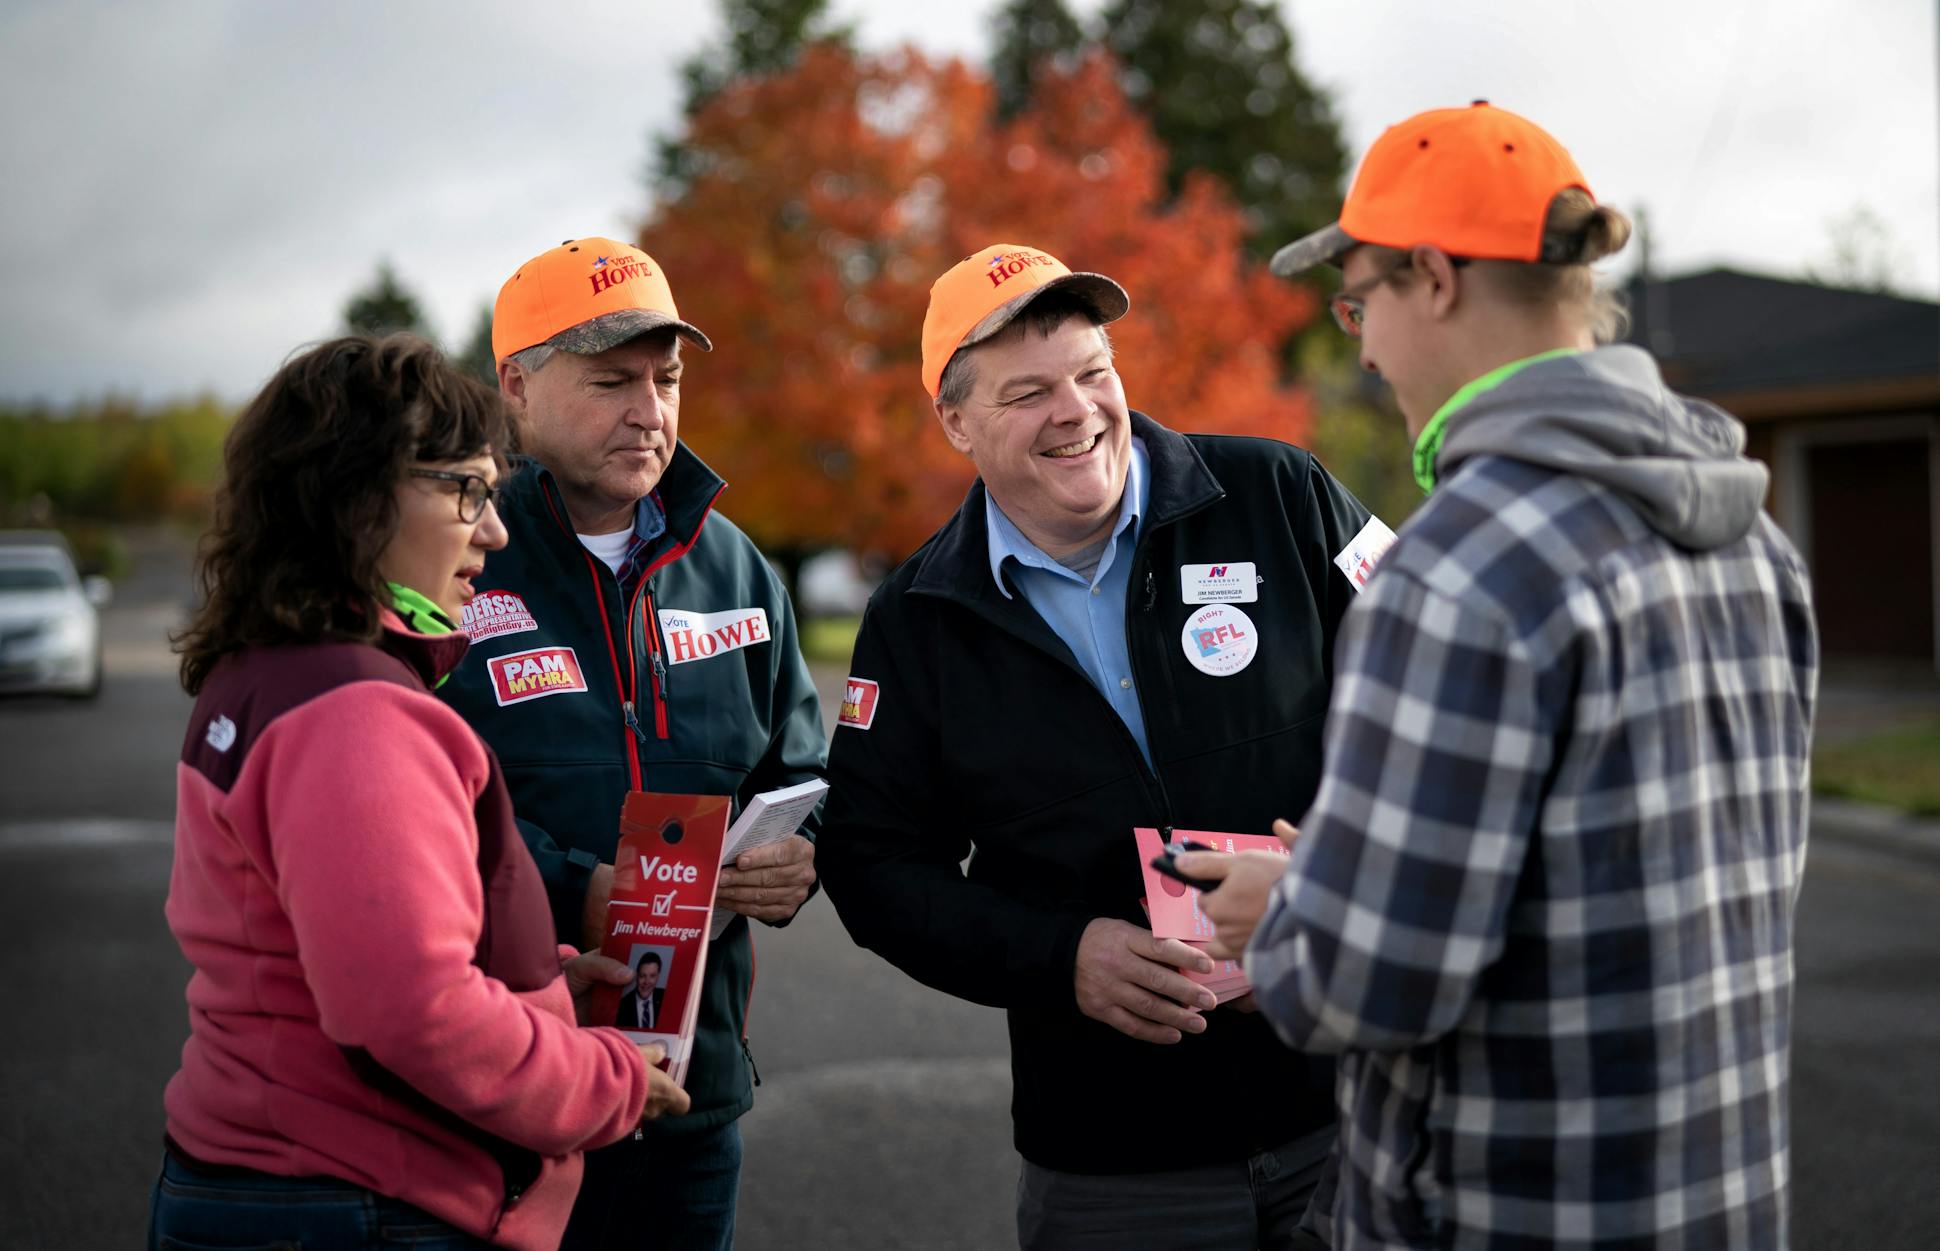 Newberger , Lt. Governor candidate Donna Bergstrom and secretary of state candidate John Howe talked with a local volunteer as they set out to door knock through Aurora, MN before heading to the next stop.